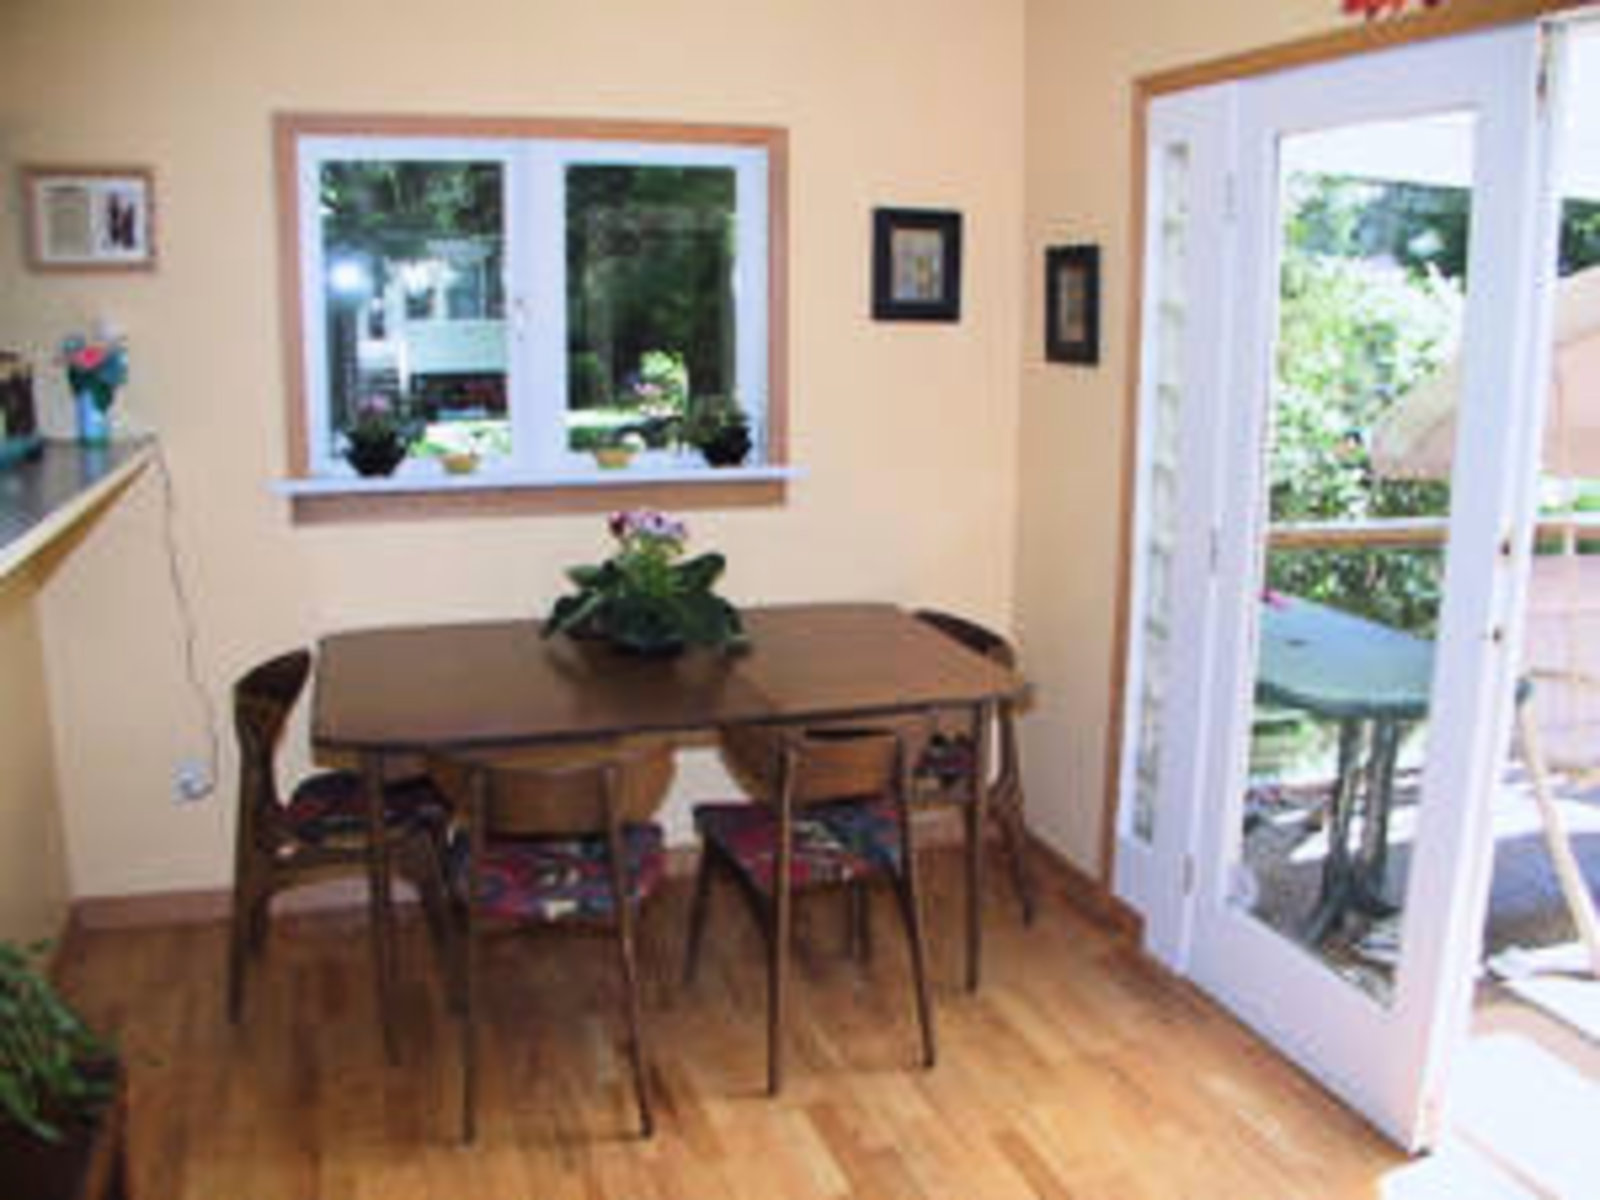 Dining Room Use this as a mini family room or eating area